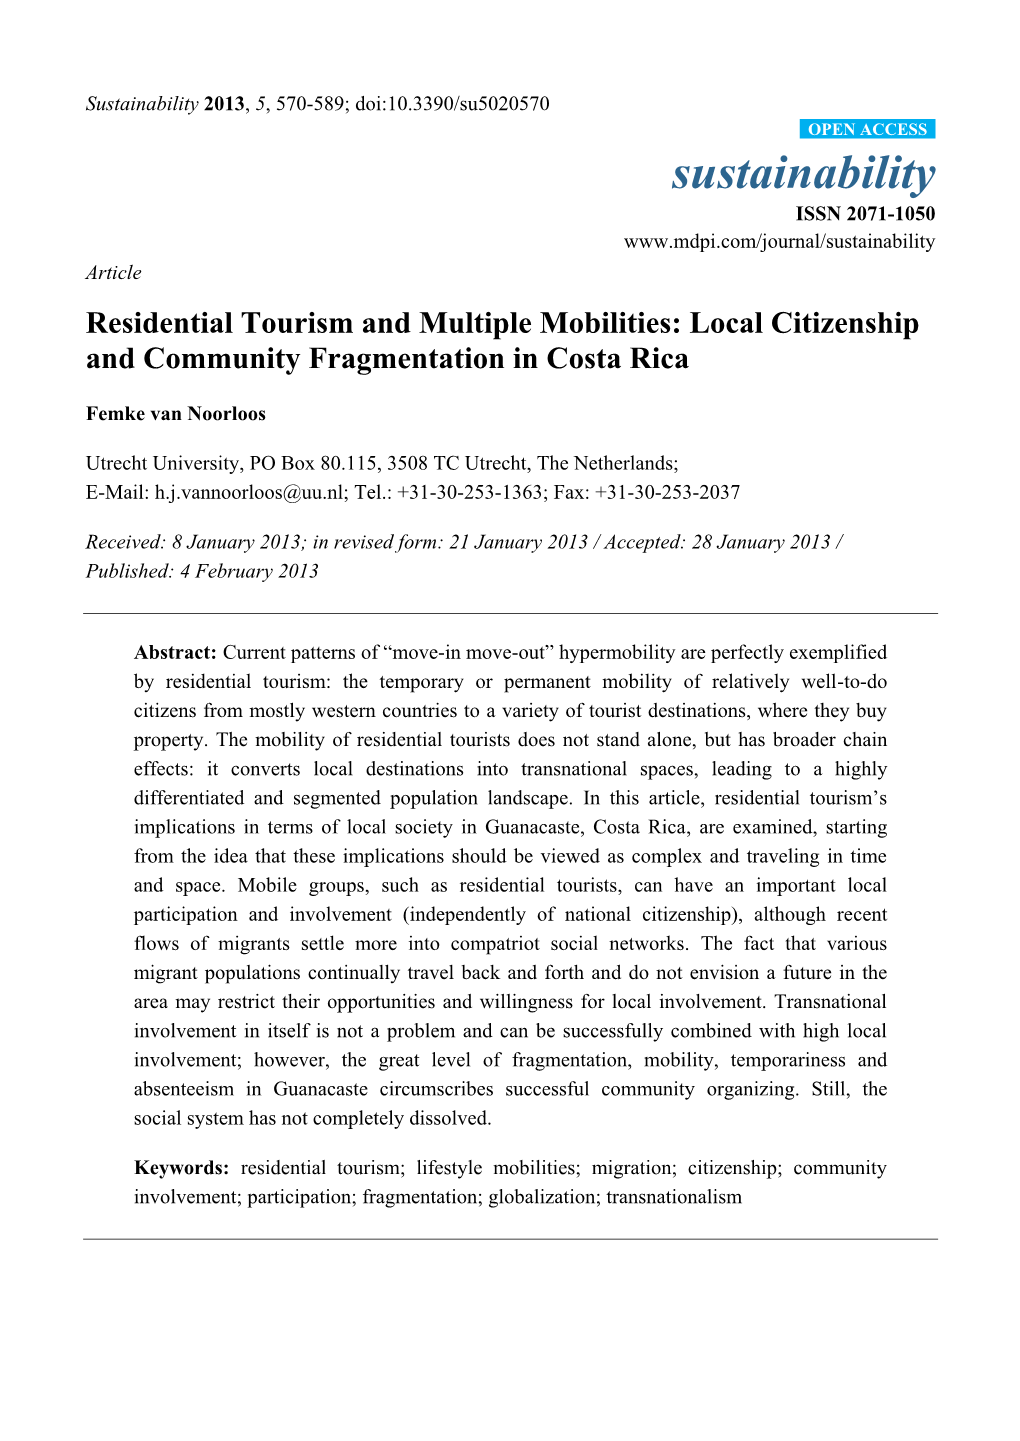 Residential Tourism and Multiple Mobilities: Local Citizenship and Community Fragmentation in Costa Rica